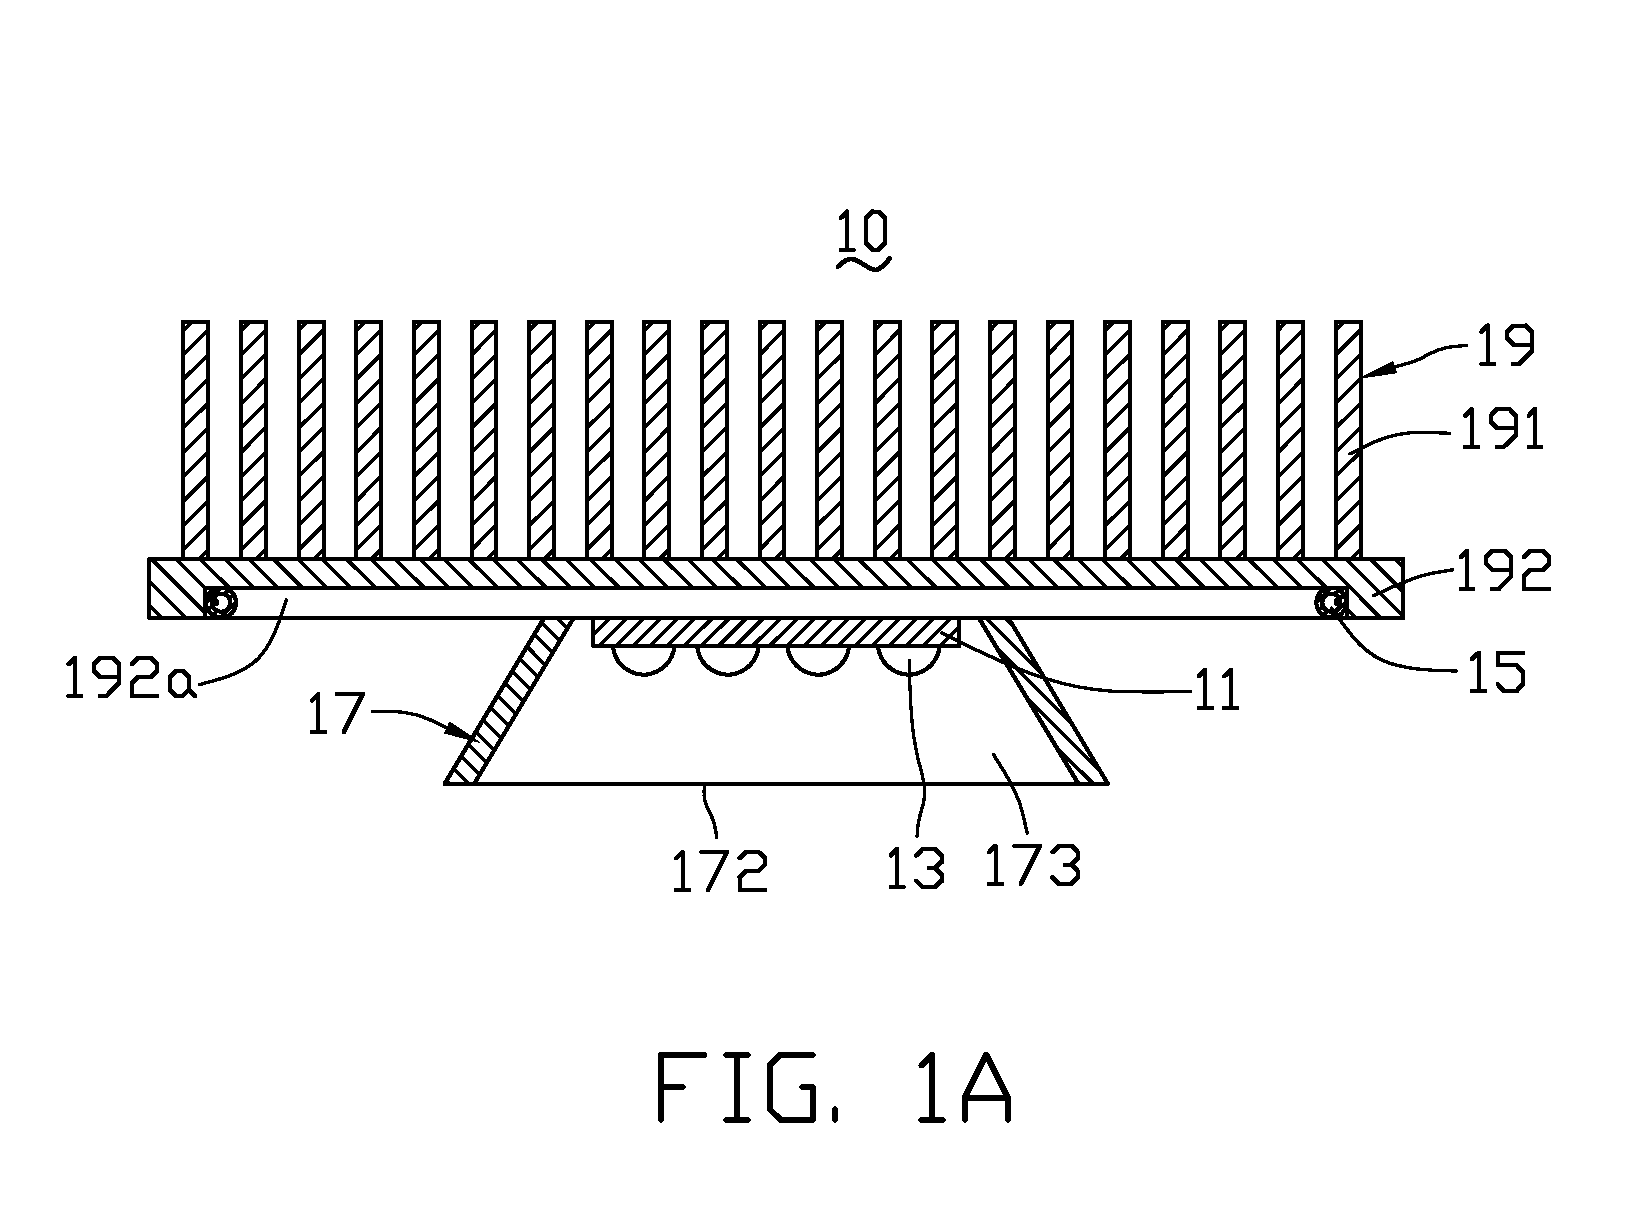 LED lamp cooling apparatus with pulsating heat pipe